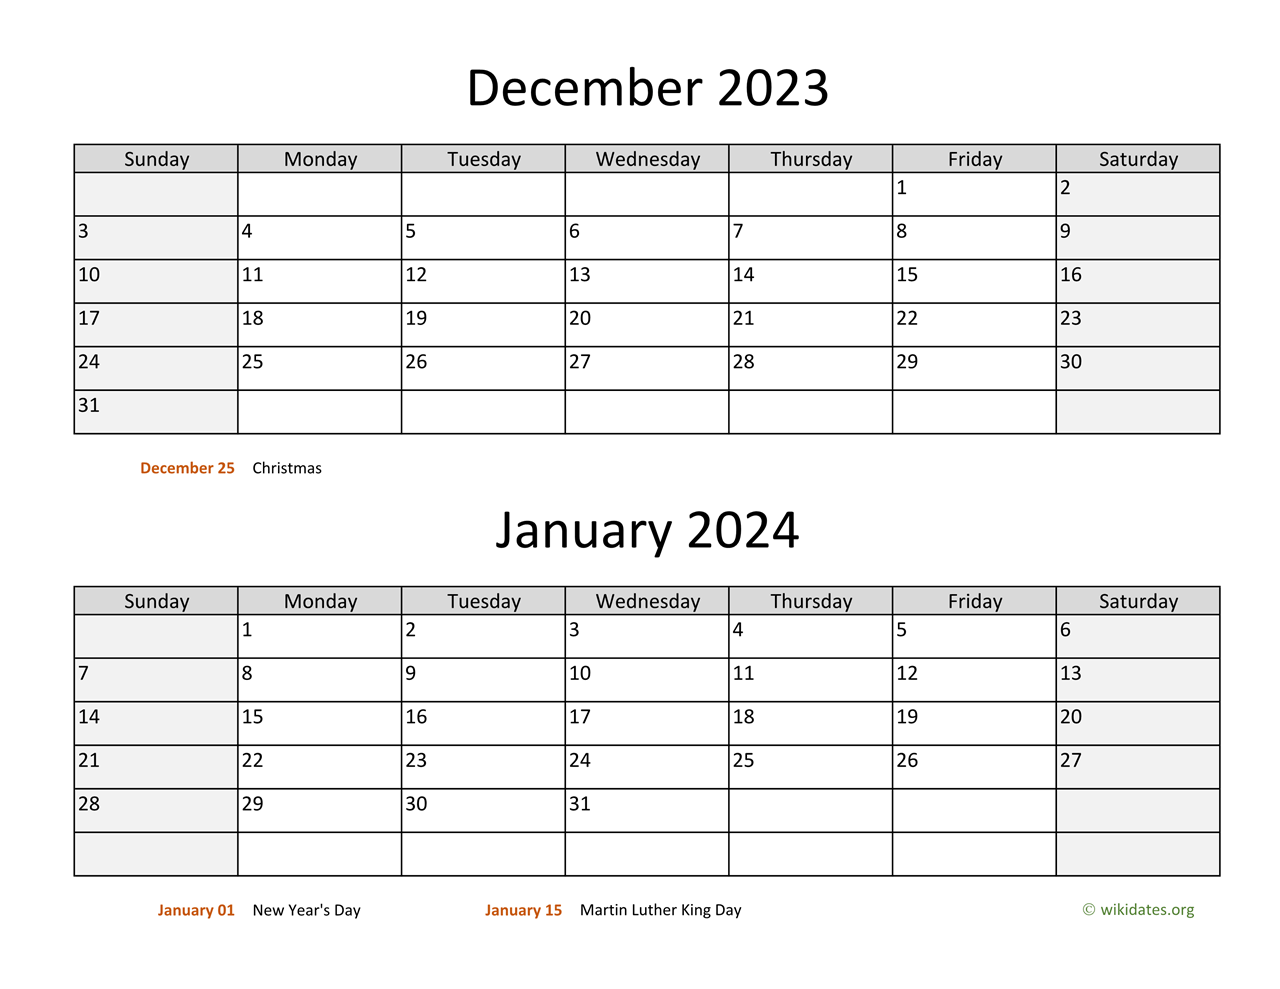 December 2023 And January 2024 Calendar | Wikidates for December 2023 To January 2024 Calendar Printable